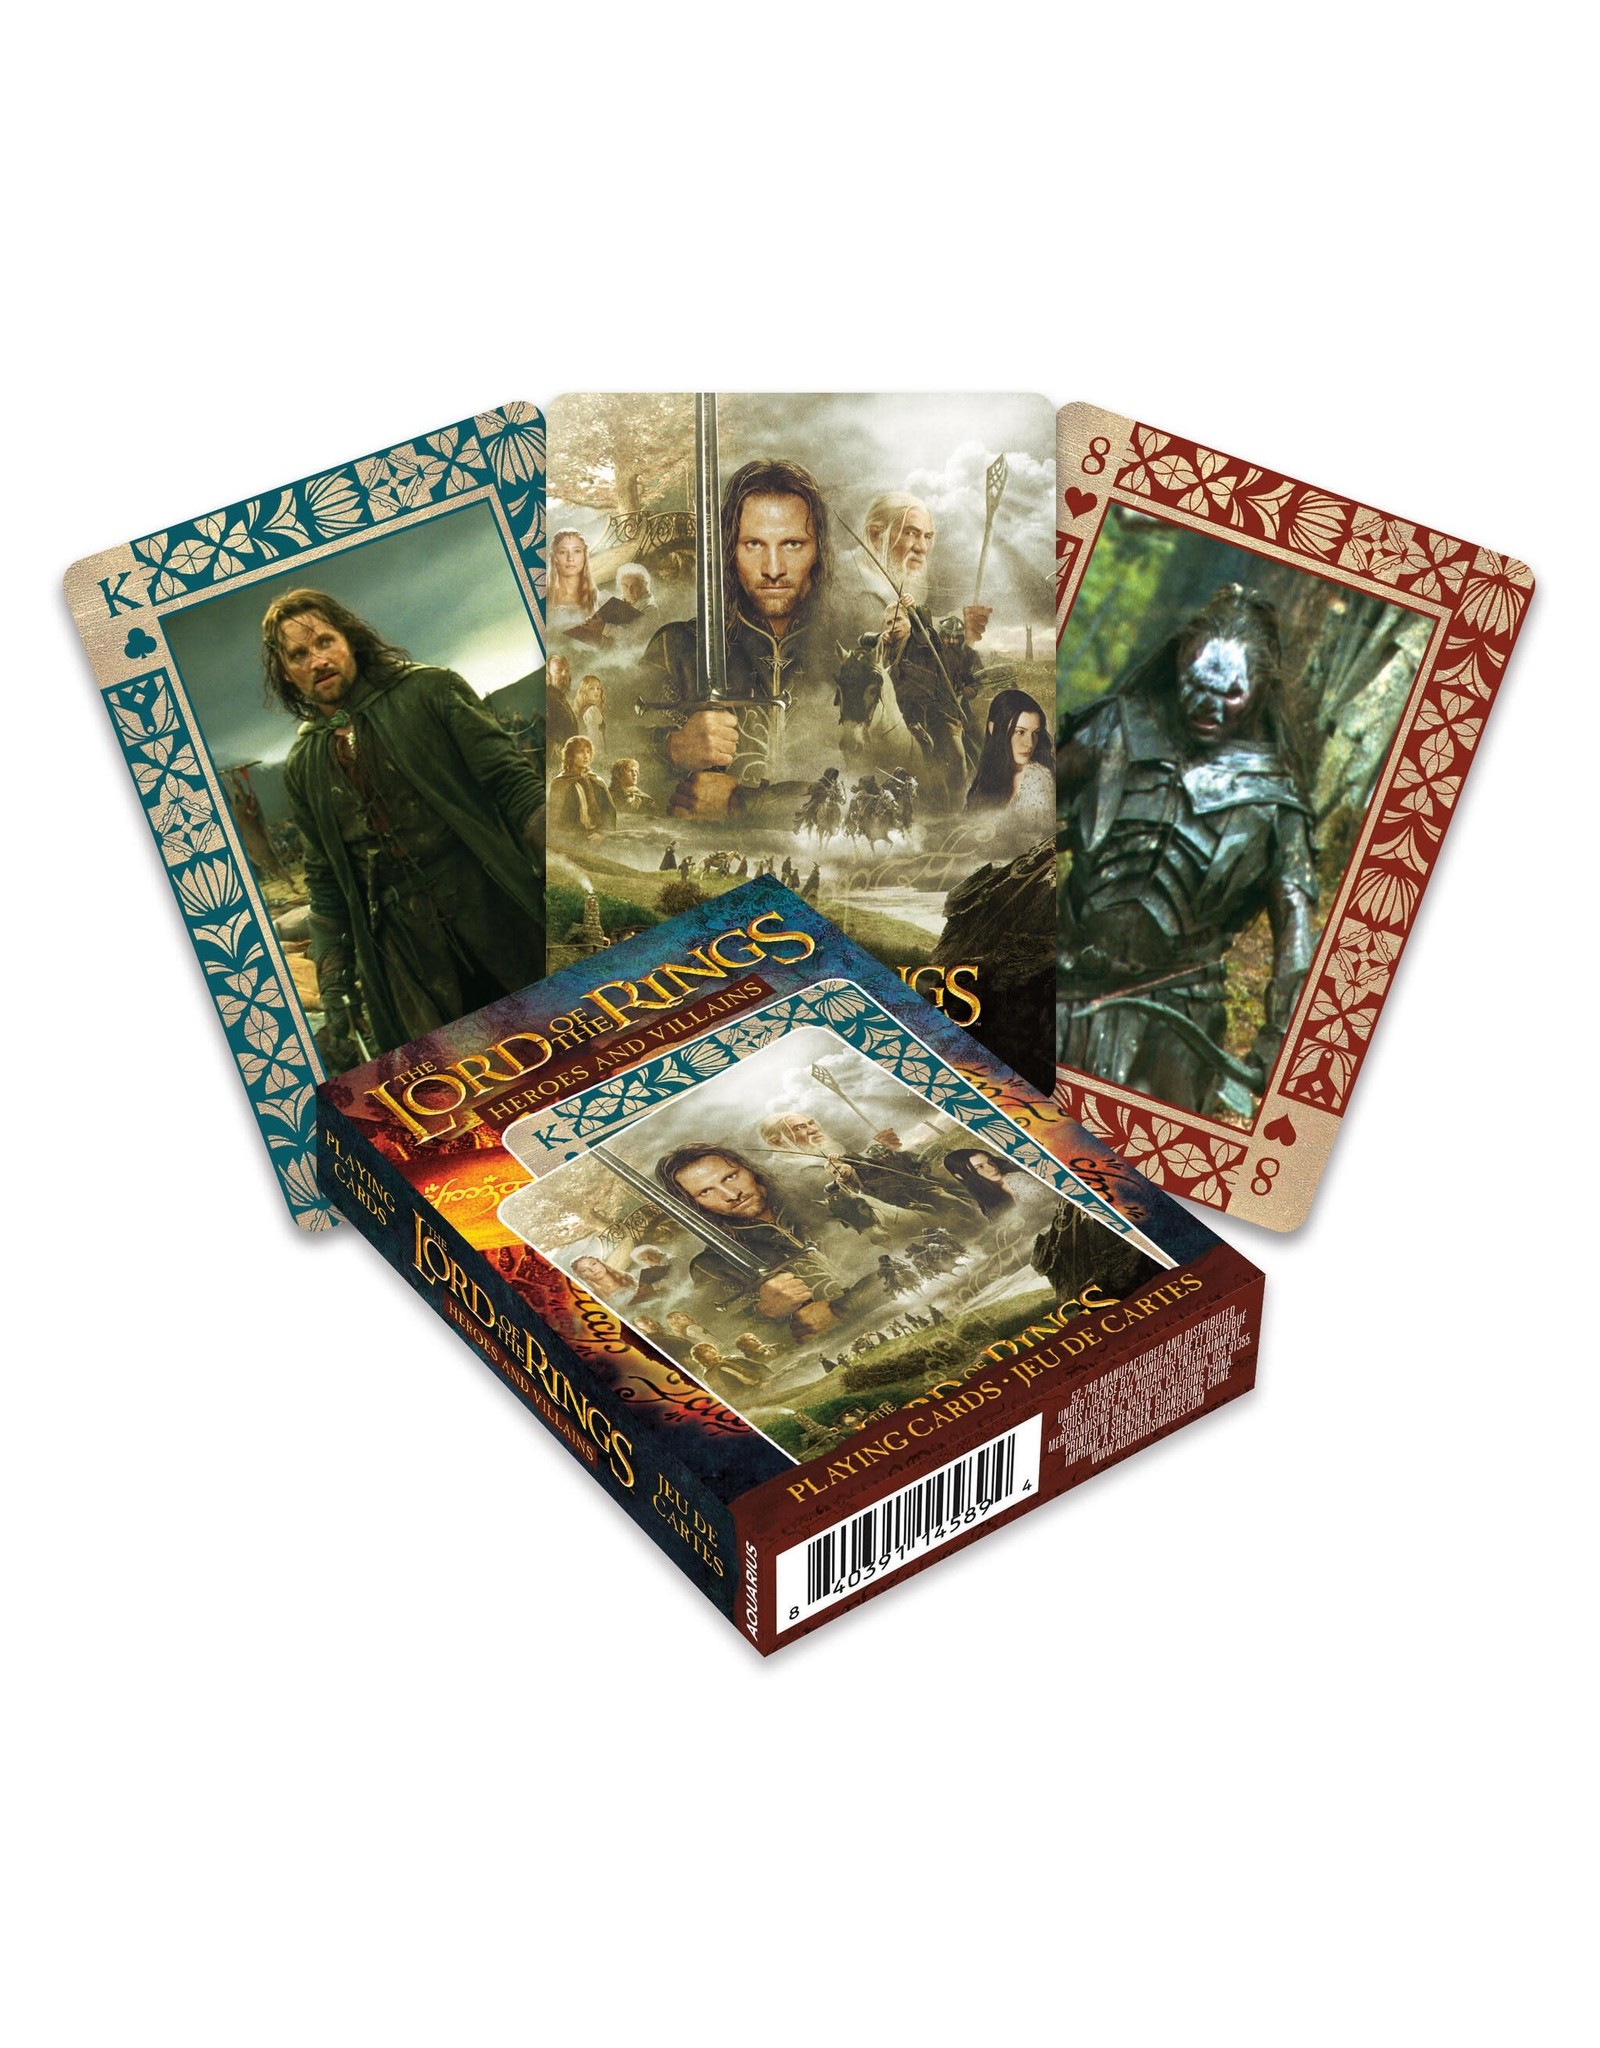 NMR Lord of the Rings - Heroes & Villains Playing Cards